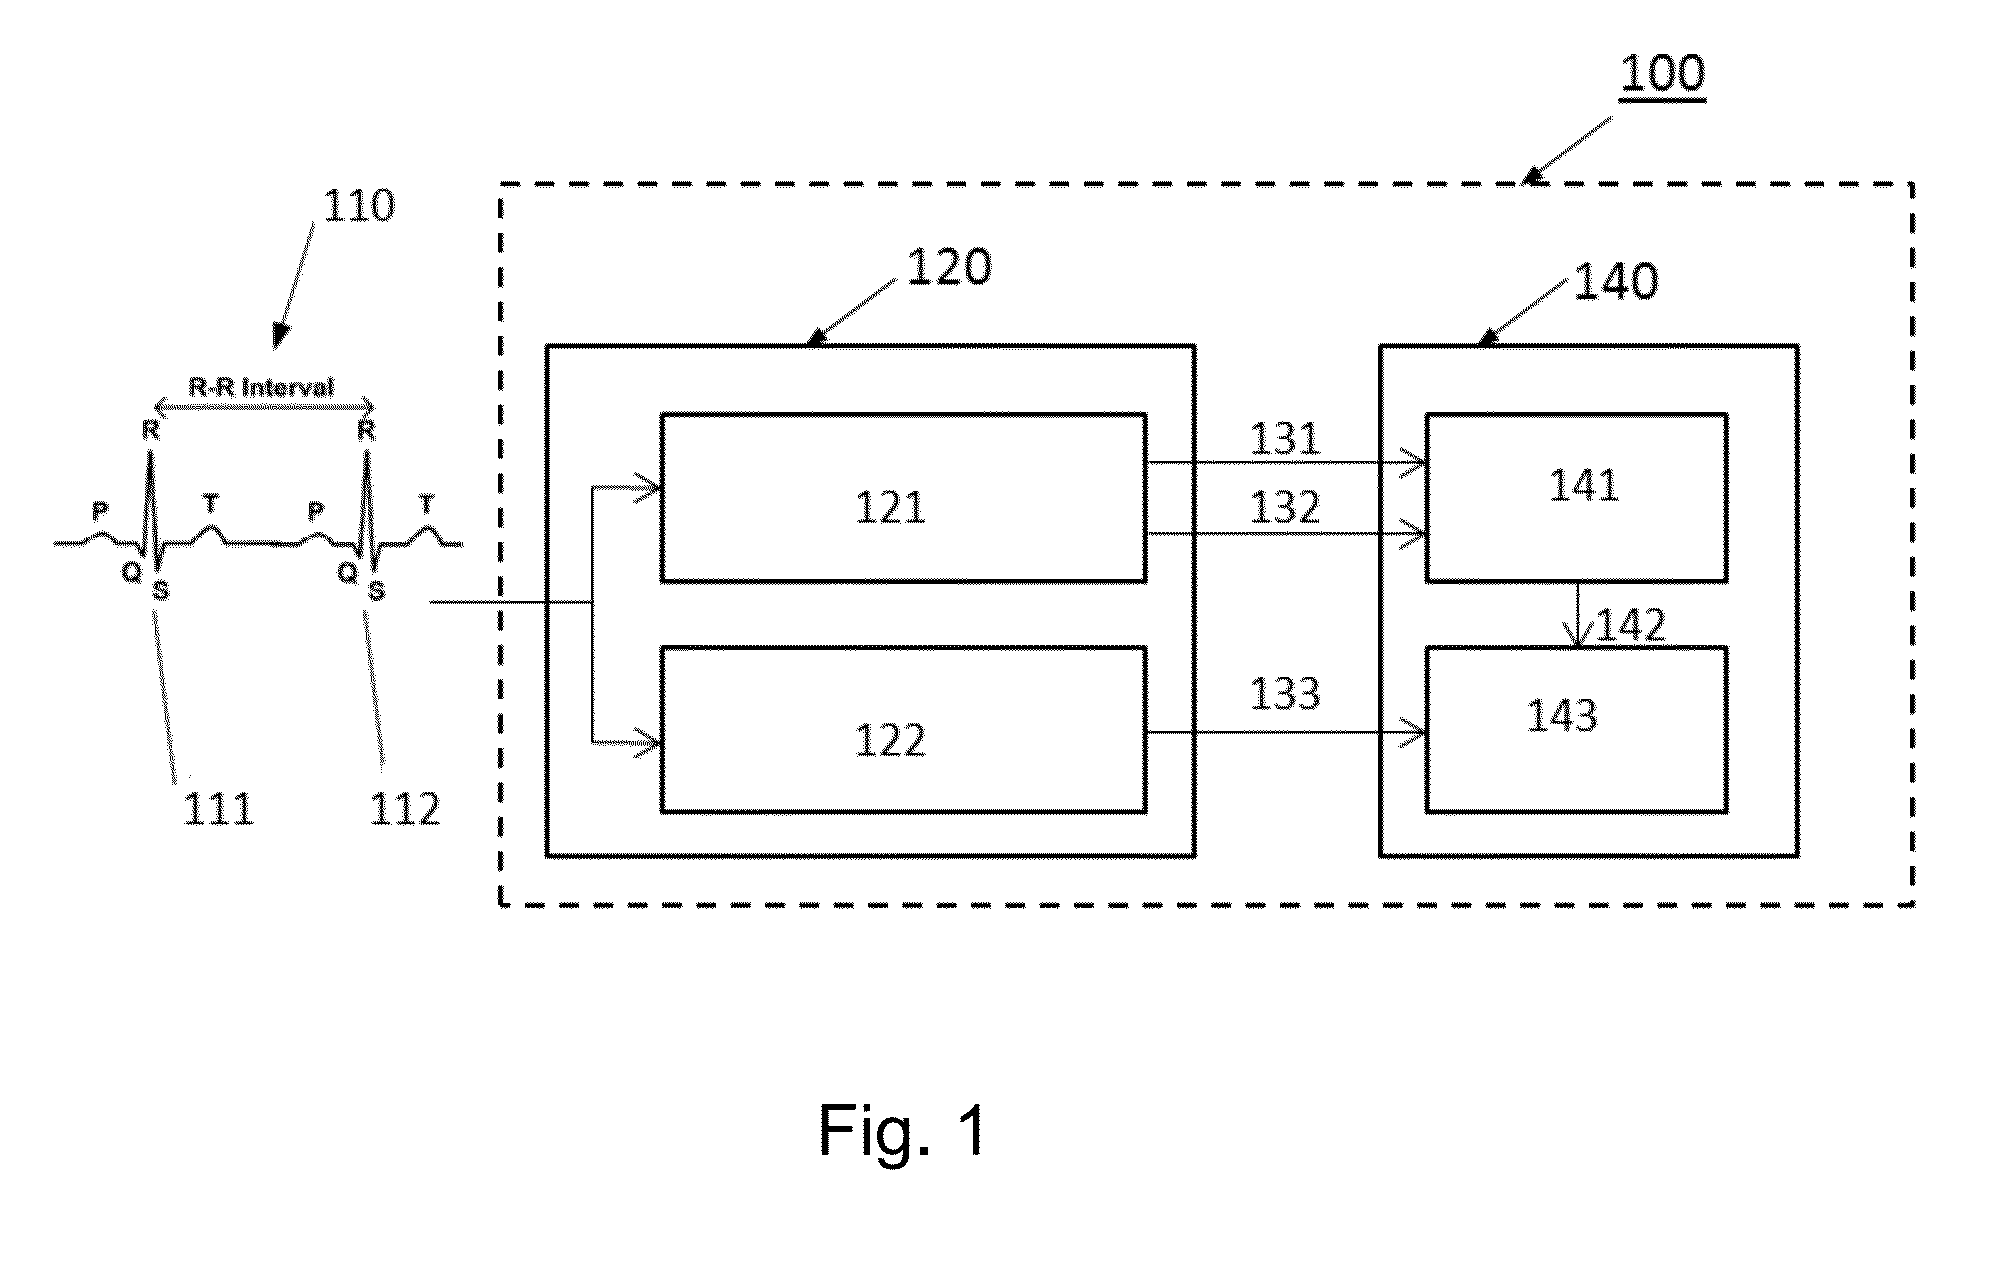 System and Method for the Analysis of Electrocardiogram Signals